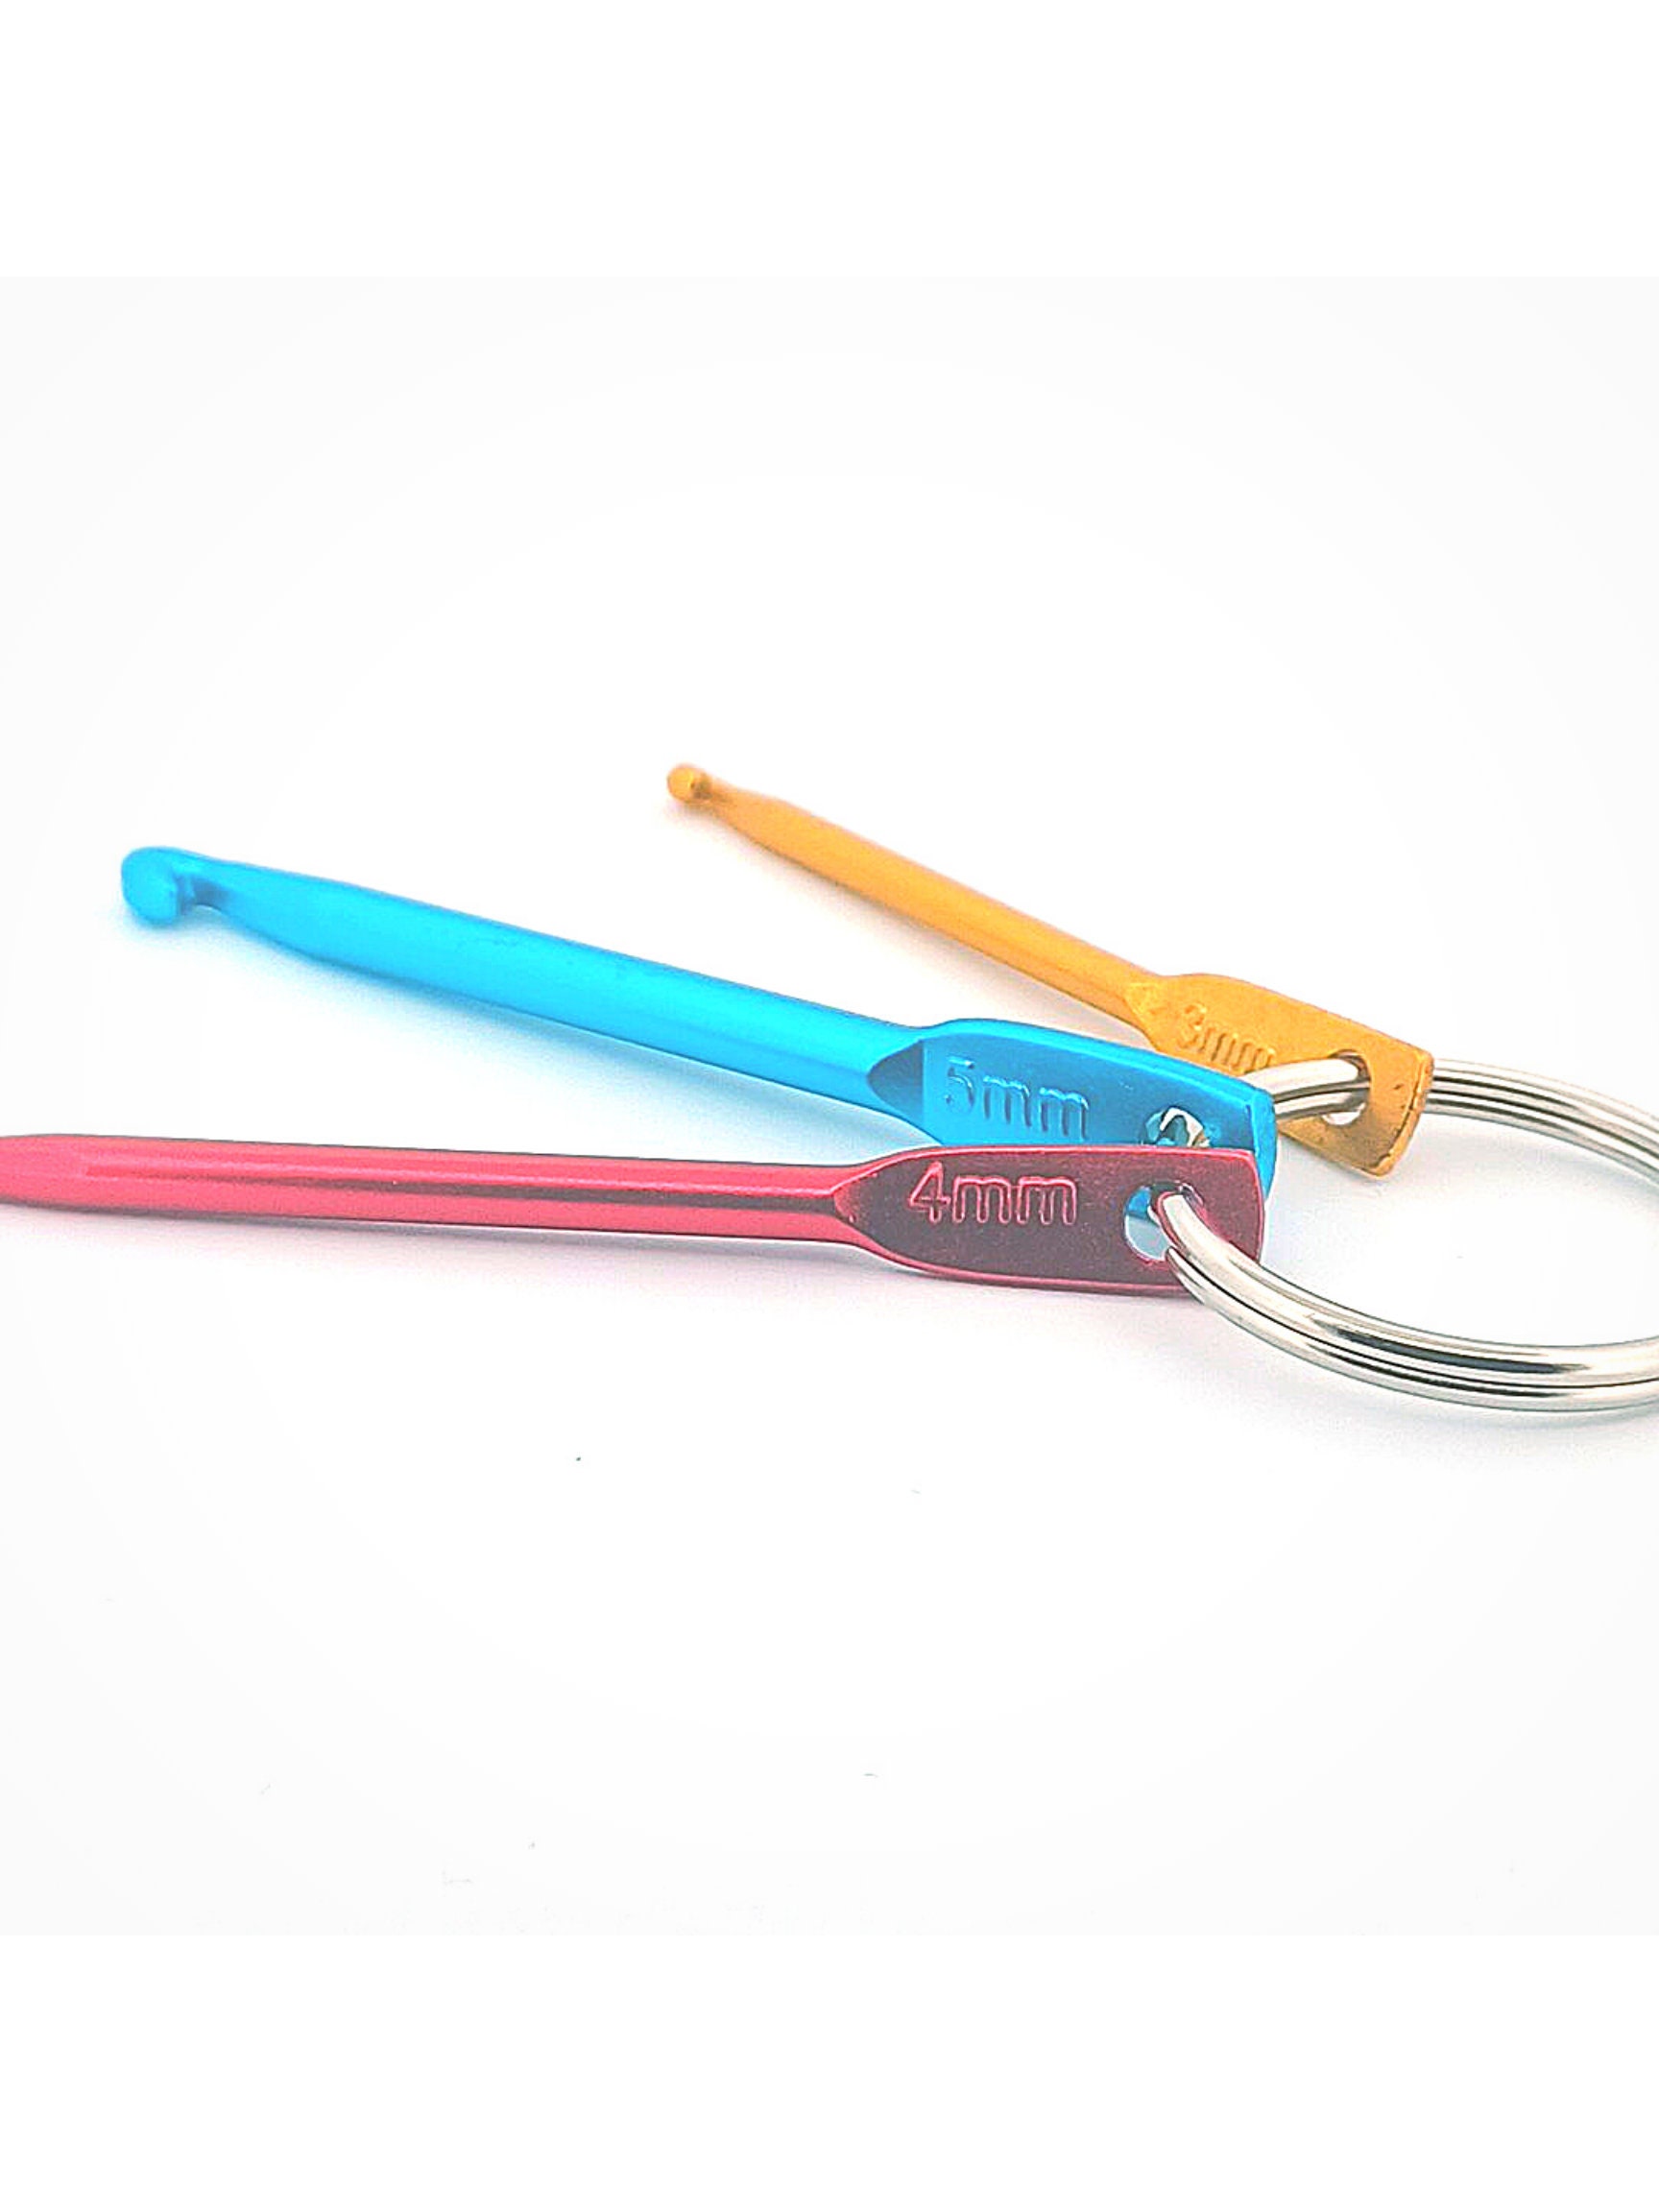 Key ring with Crochet Hooks from Hobbii